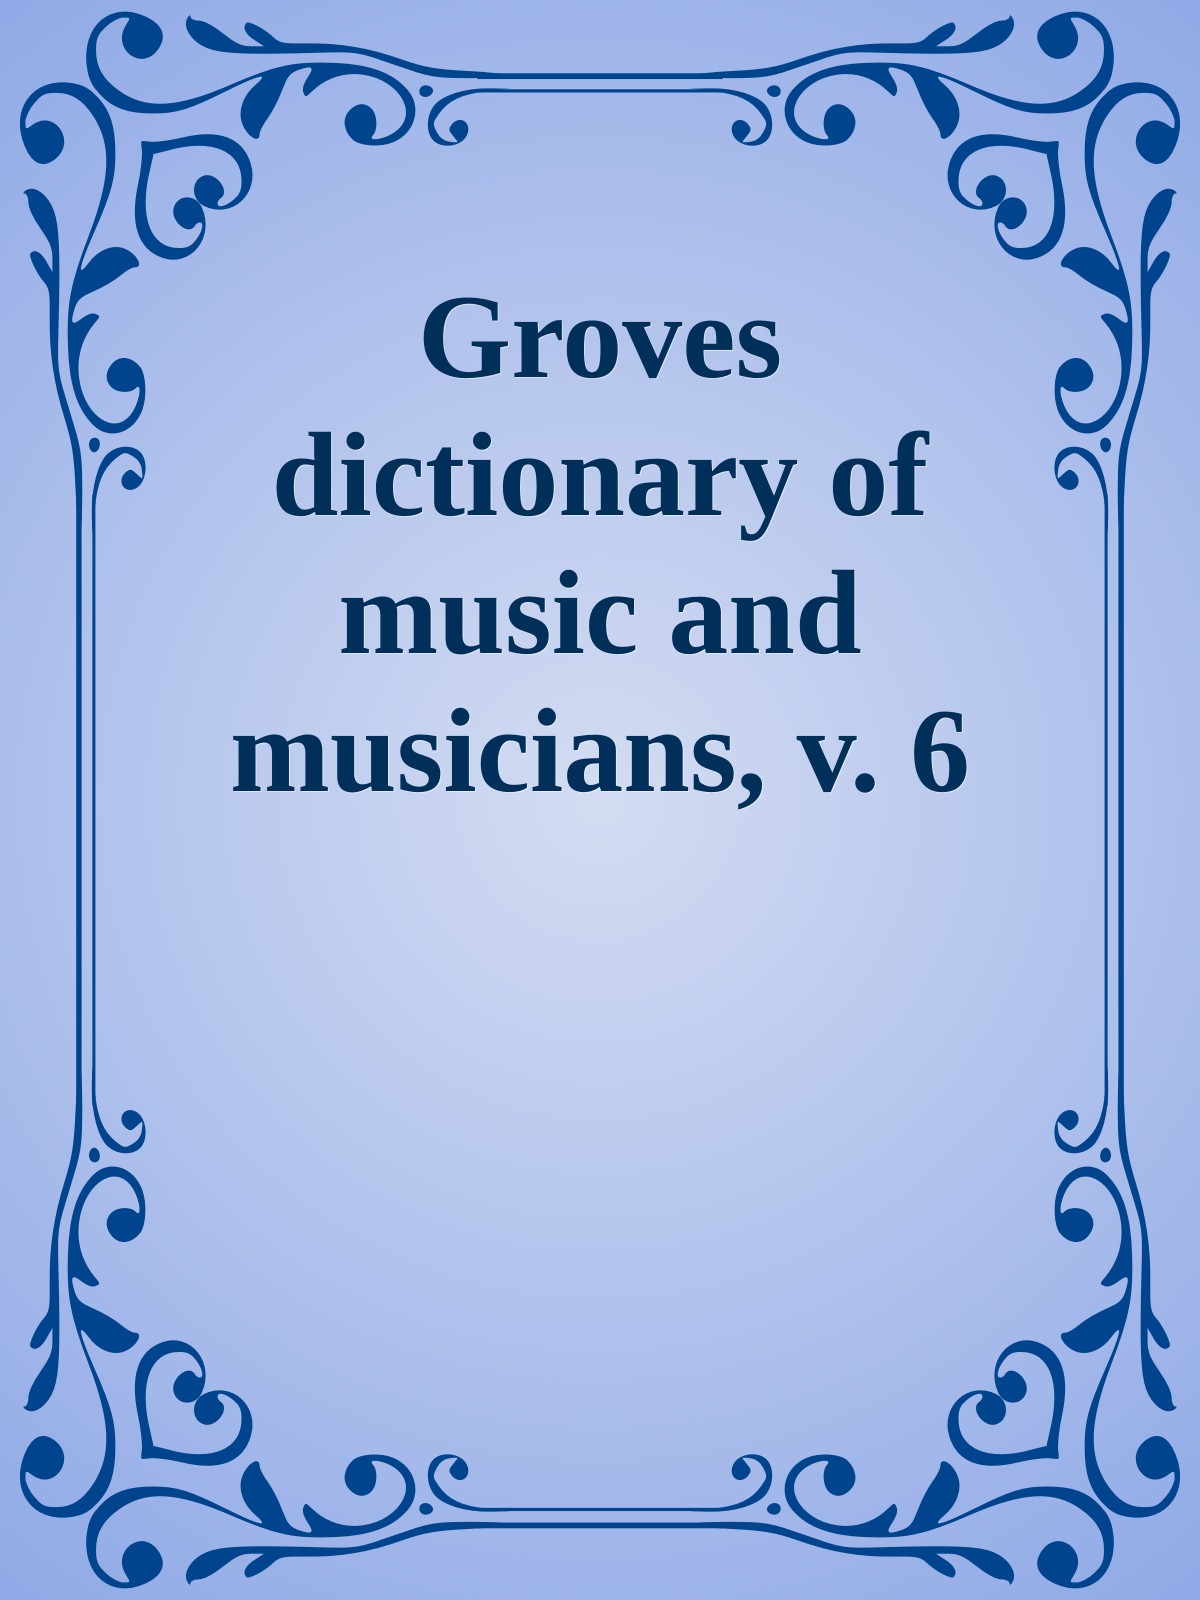 Groves dictionary of music and musicians, v. 6 American supplement (W. S. Pratt (ed.))